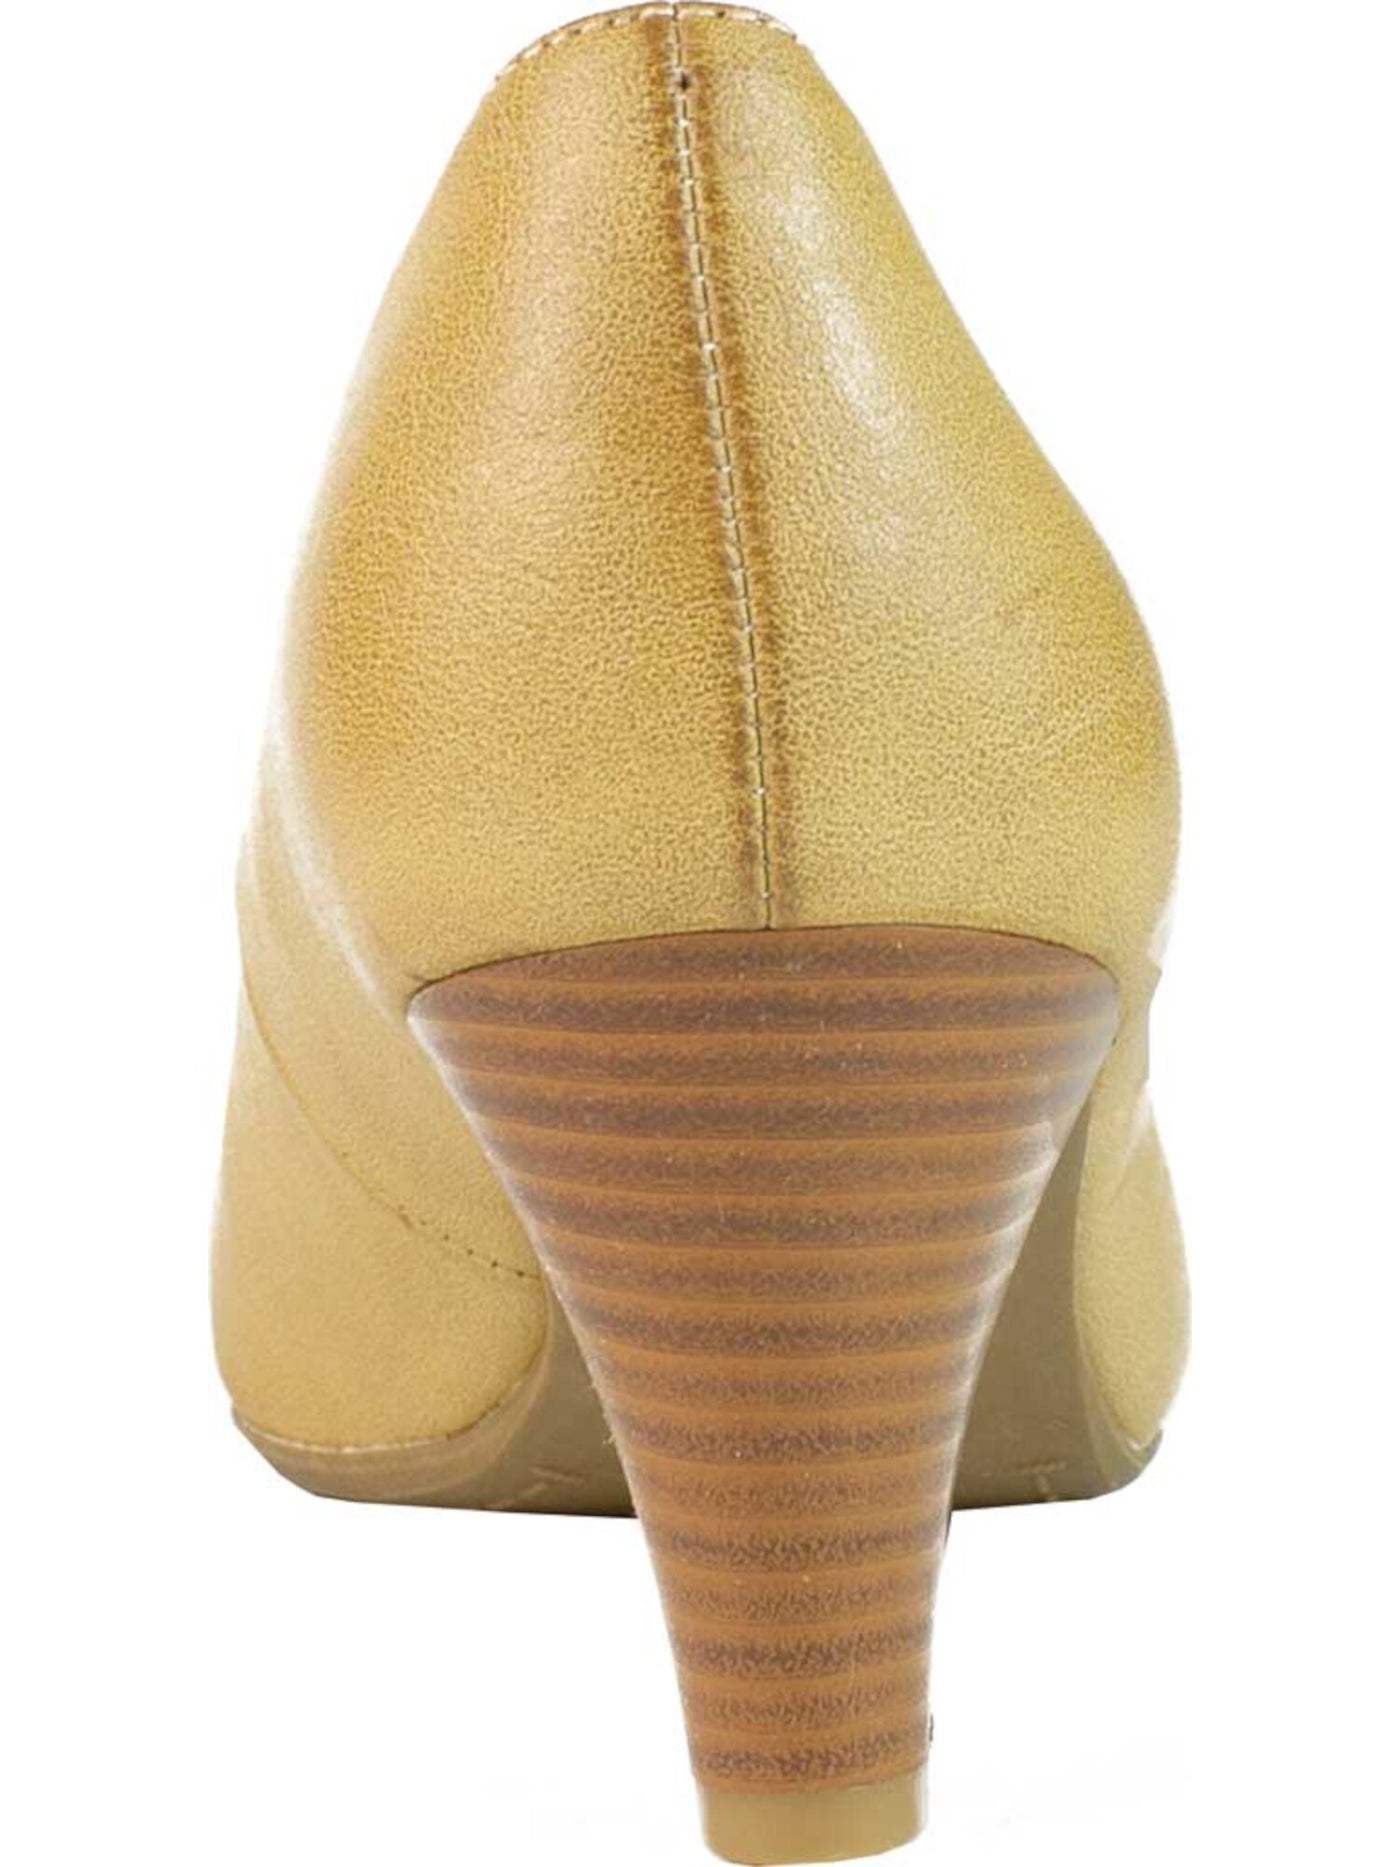 RIALTO Womens Yellow Padded Stanford Almond Toe Cone Heel Slip On Pumps Shoes 7.5 M